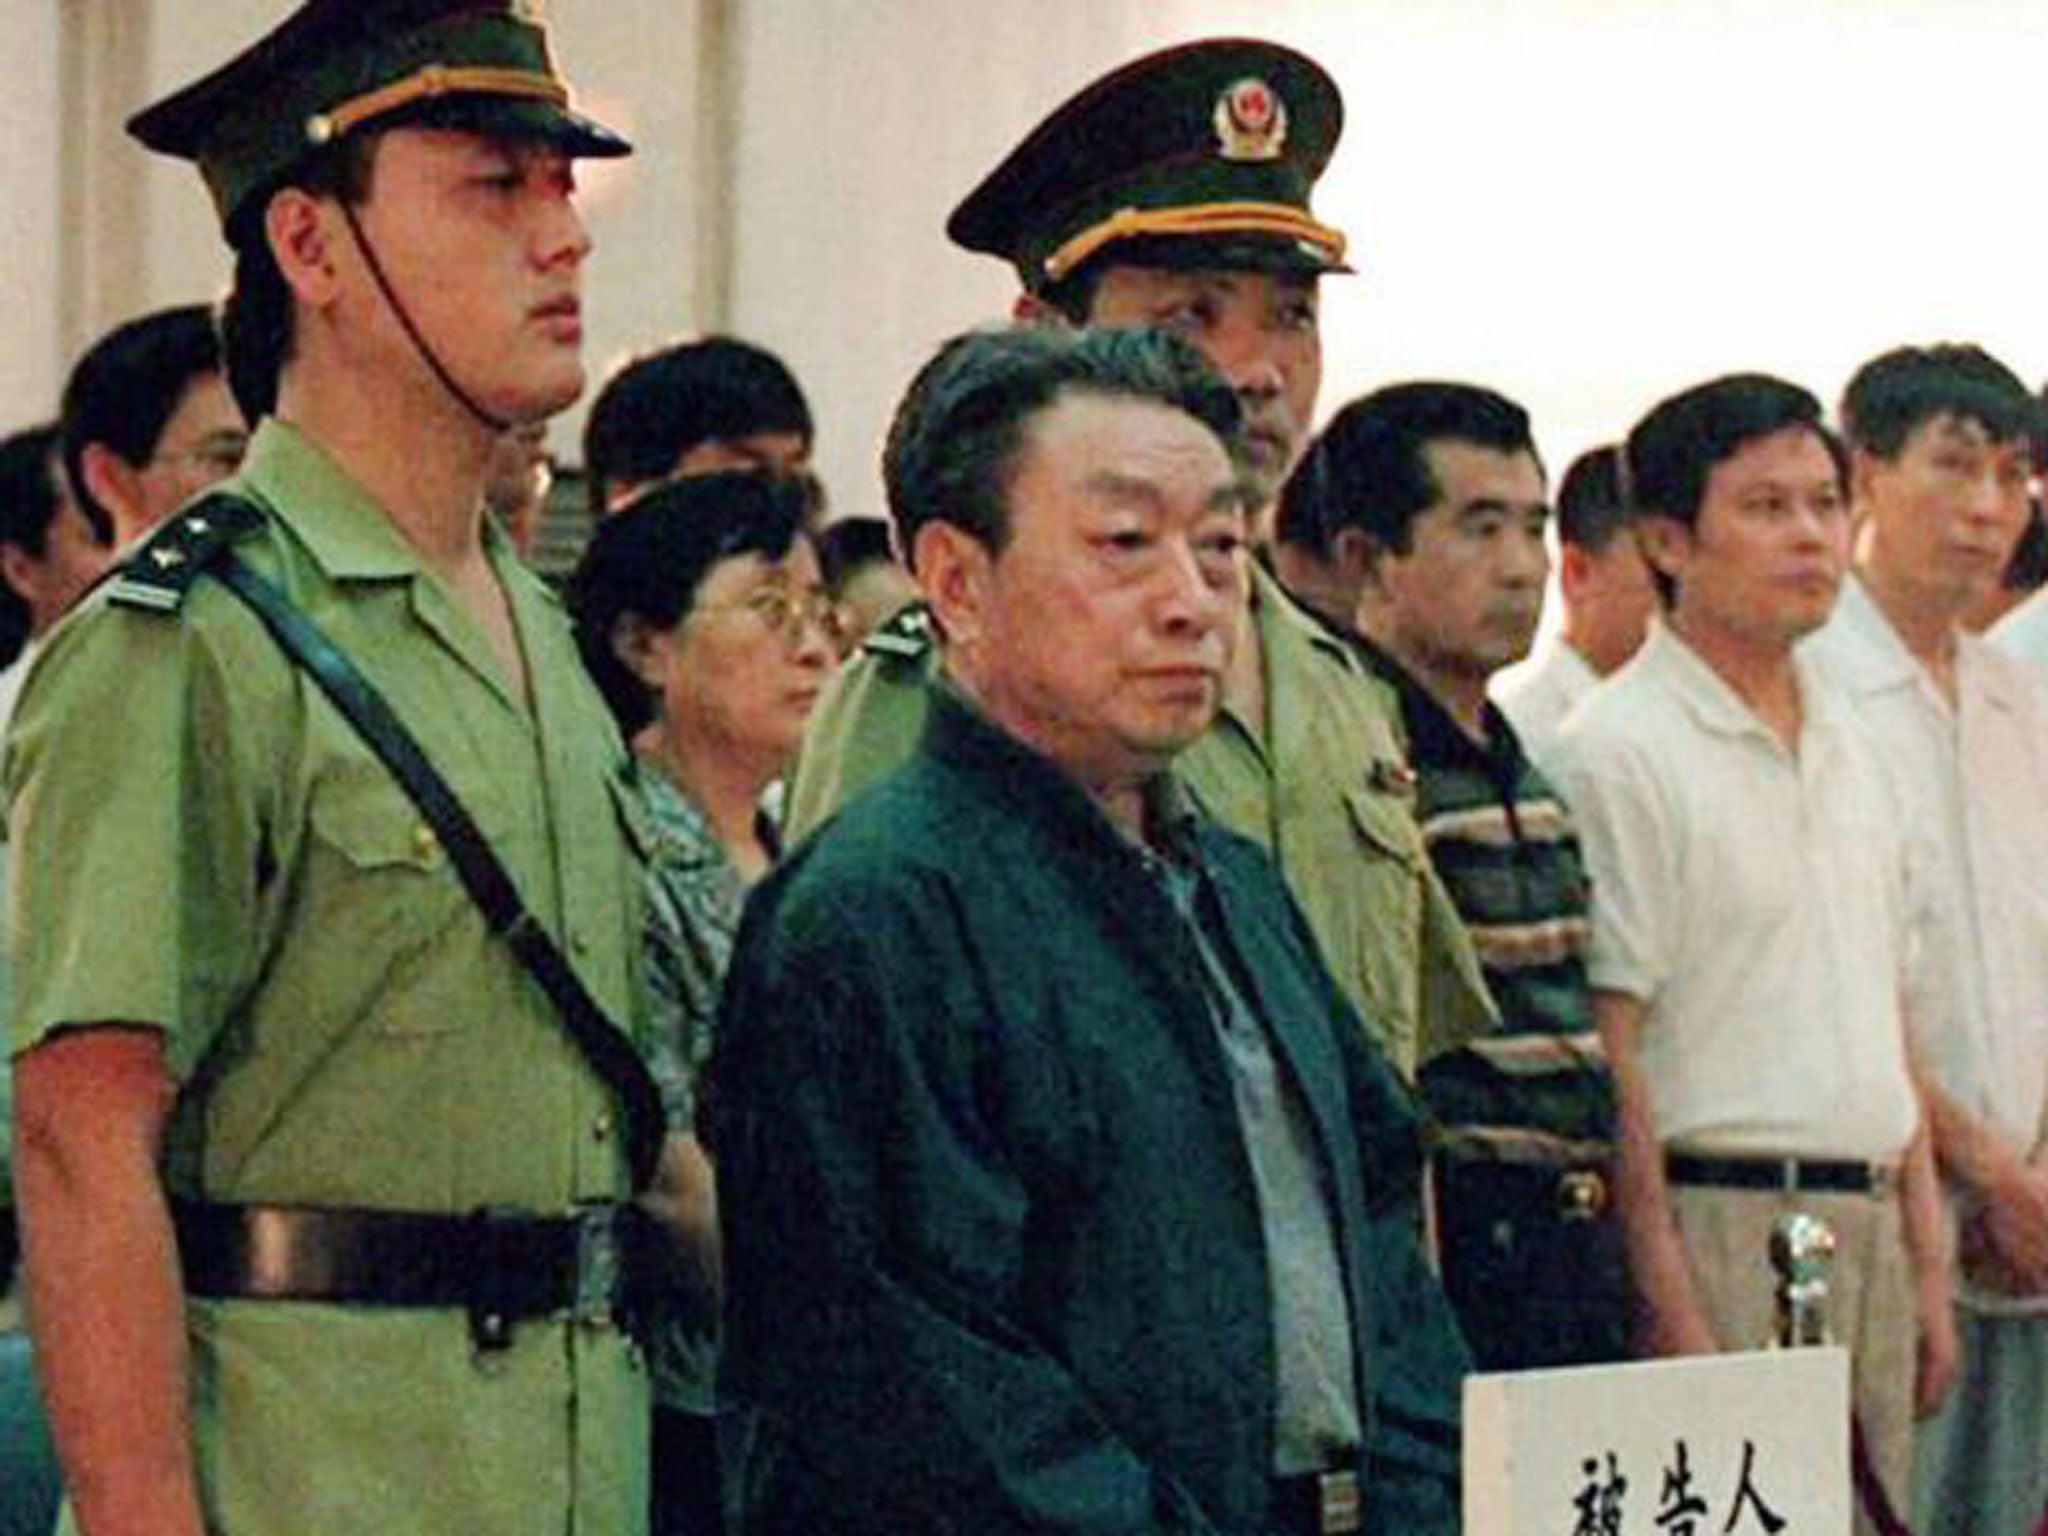 Chen in court in 1998; he was sentenced to 16 years in prison